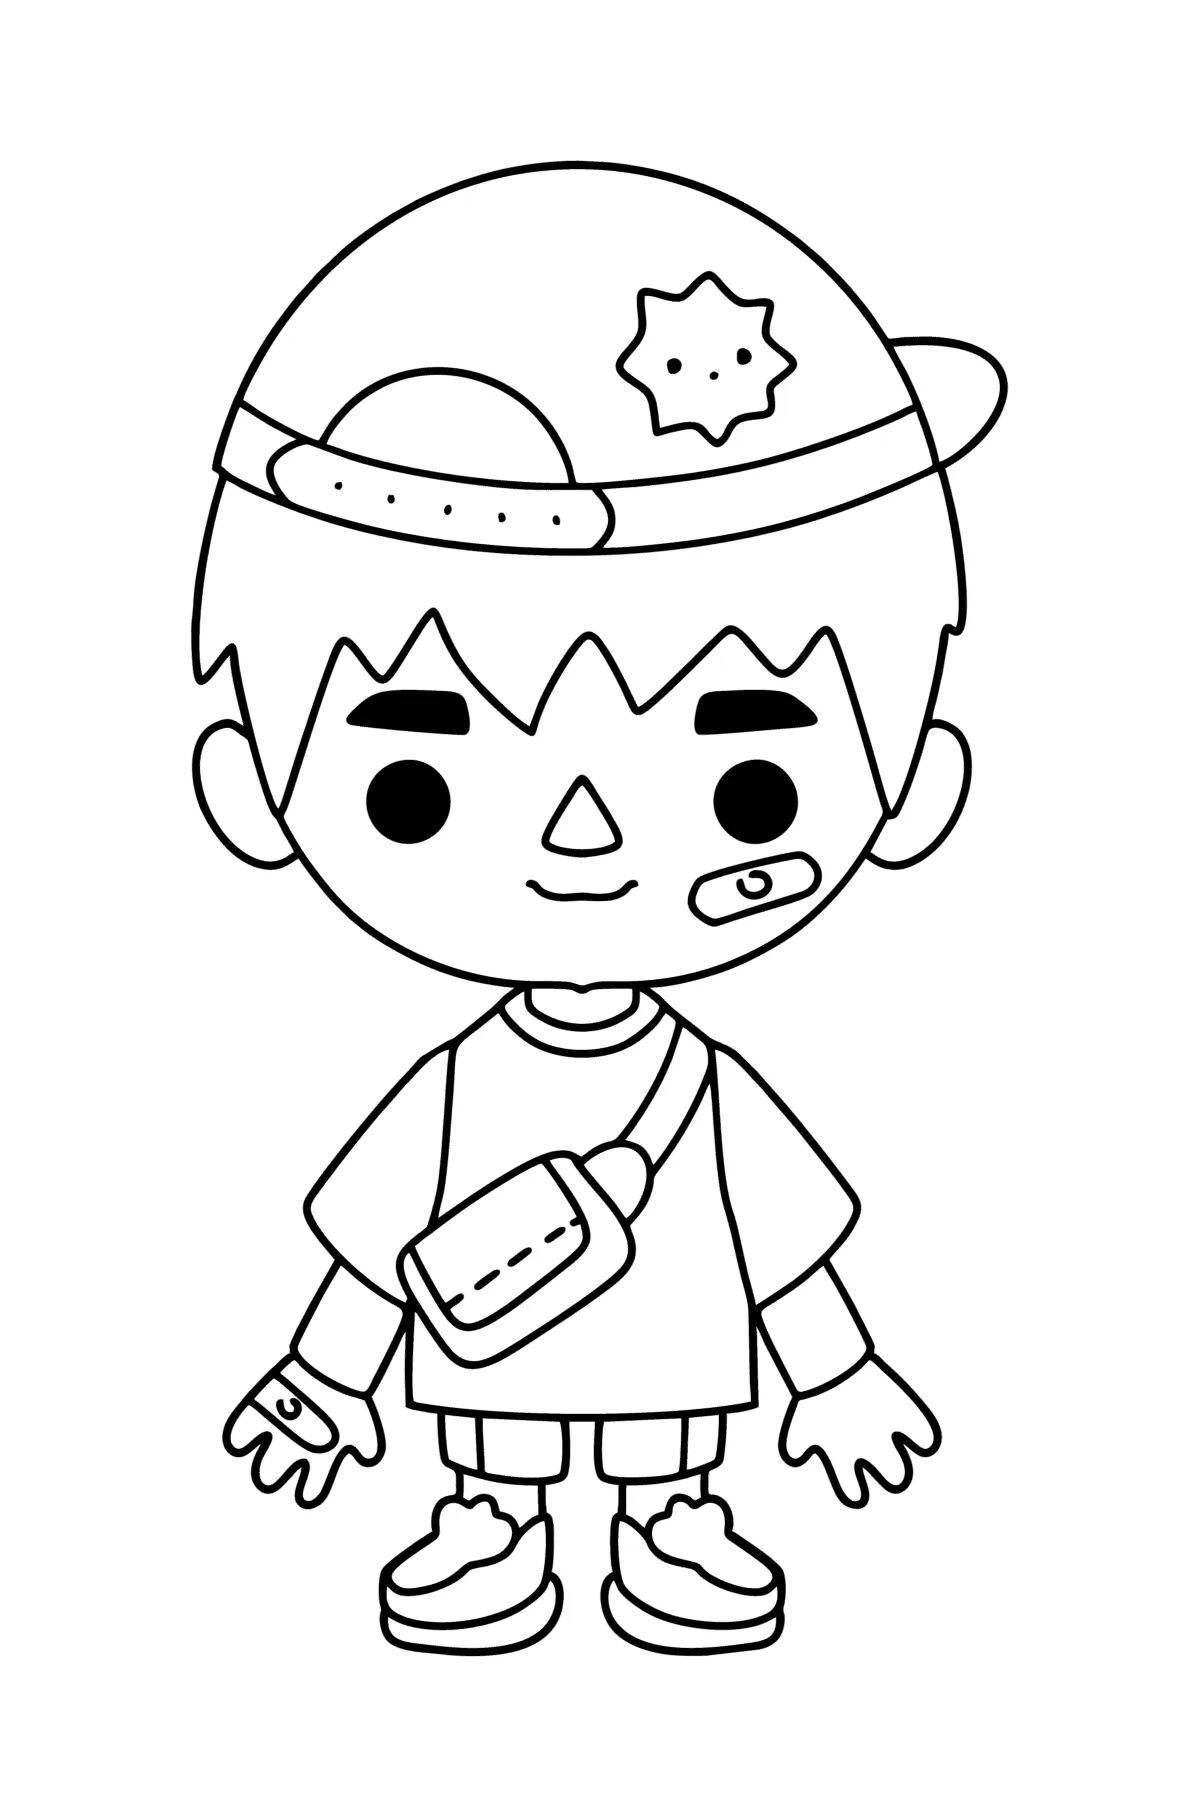 Sweet coloring page of toka boca black and white small characters